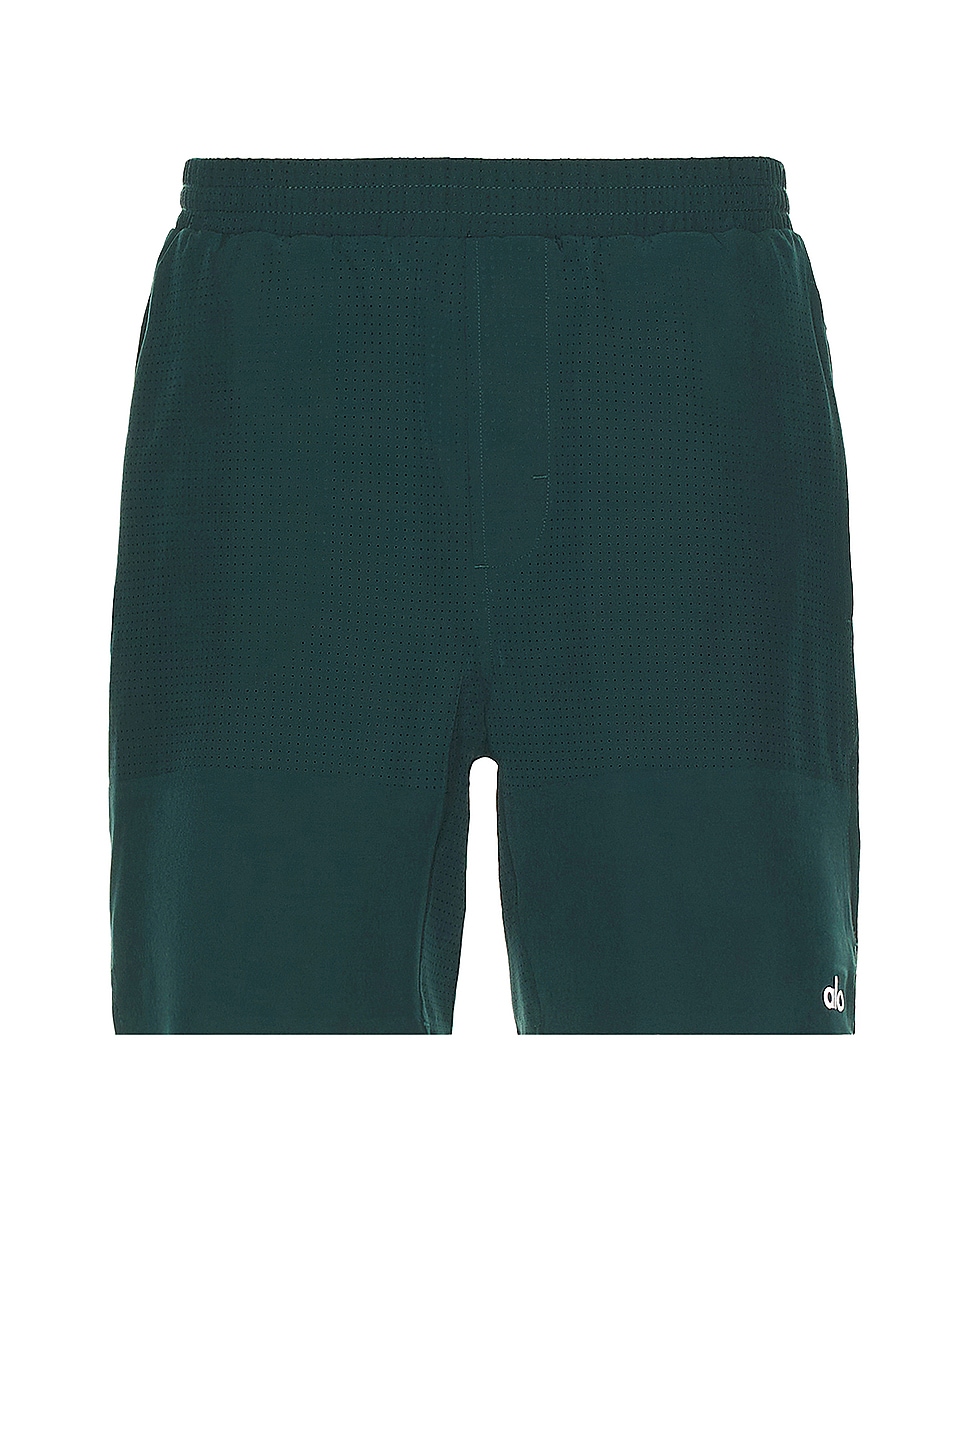 Image 1 of alo 7" Traction Short in Midnight Green